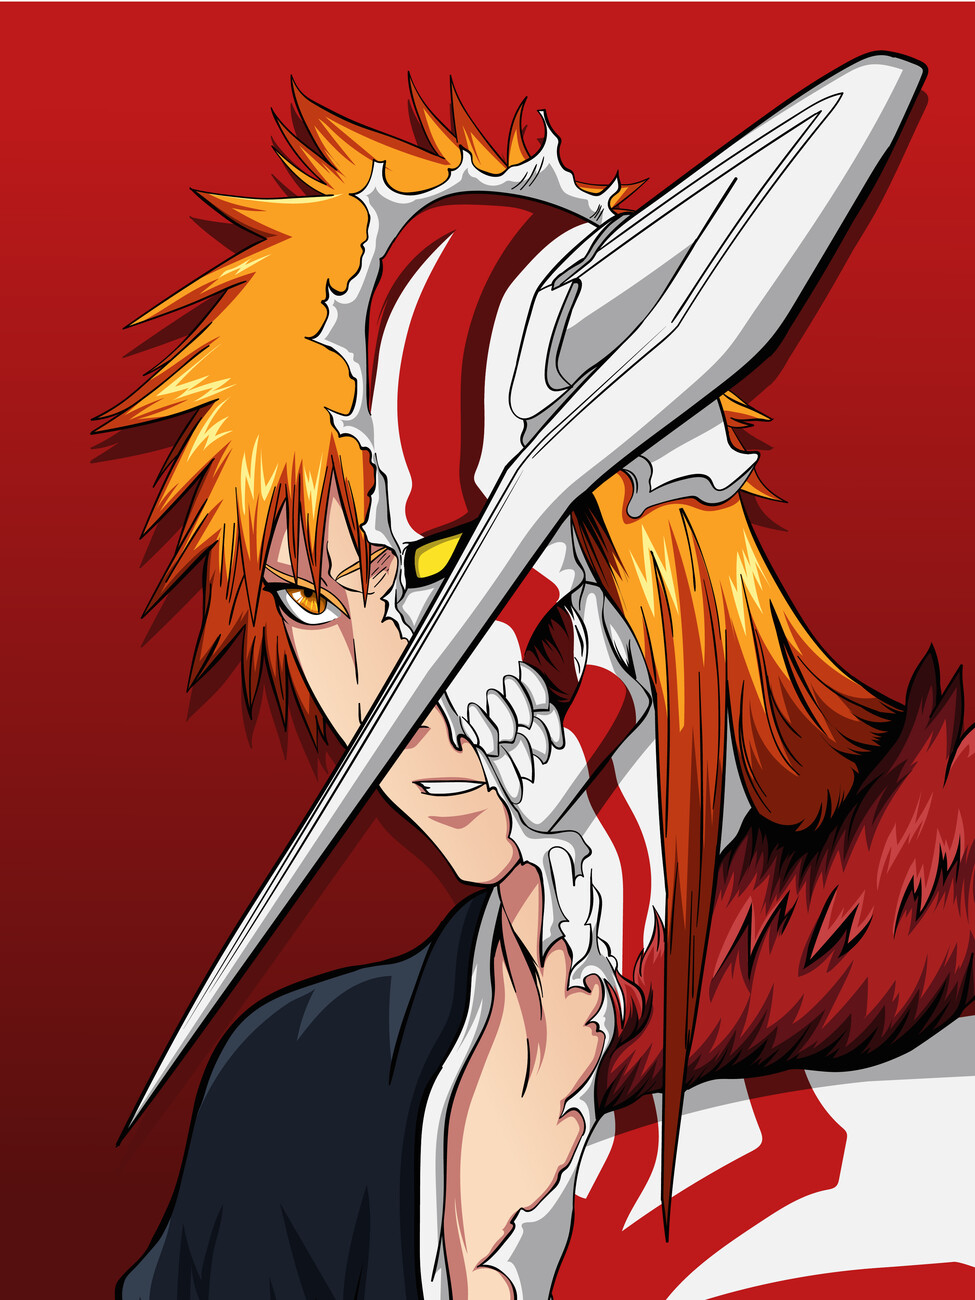 What happens at the end of Bleach (anime)? - Quora